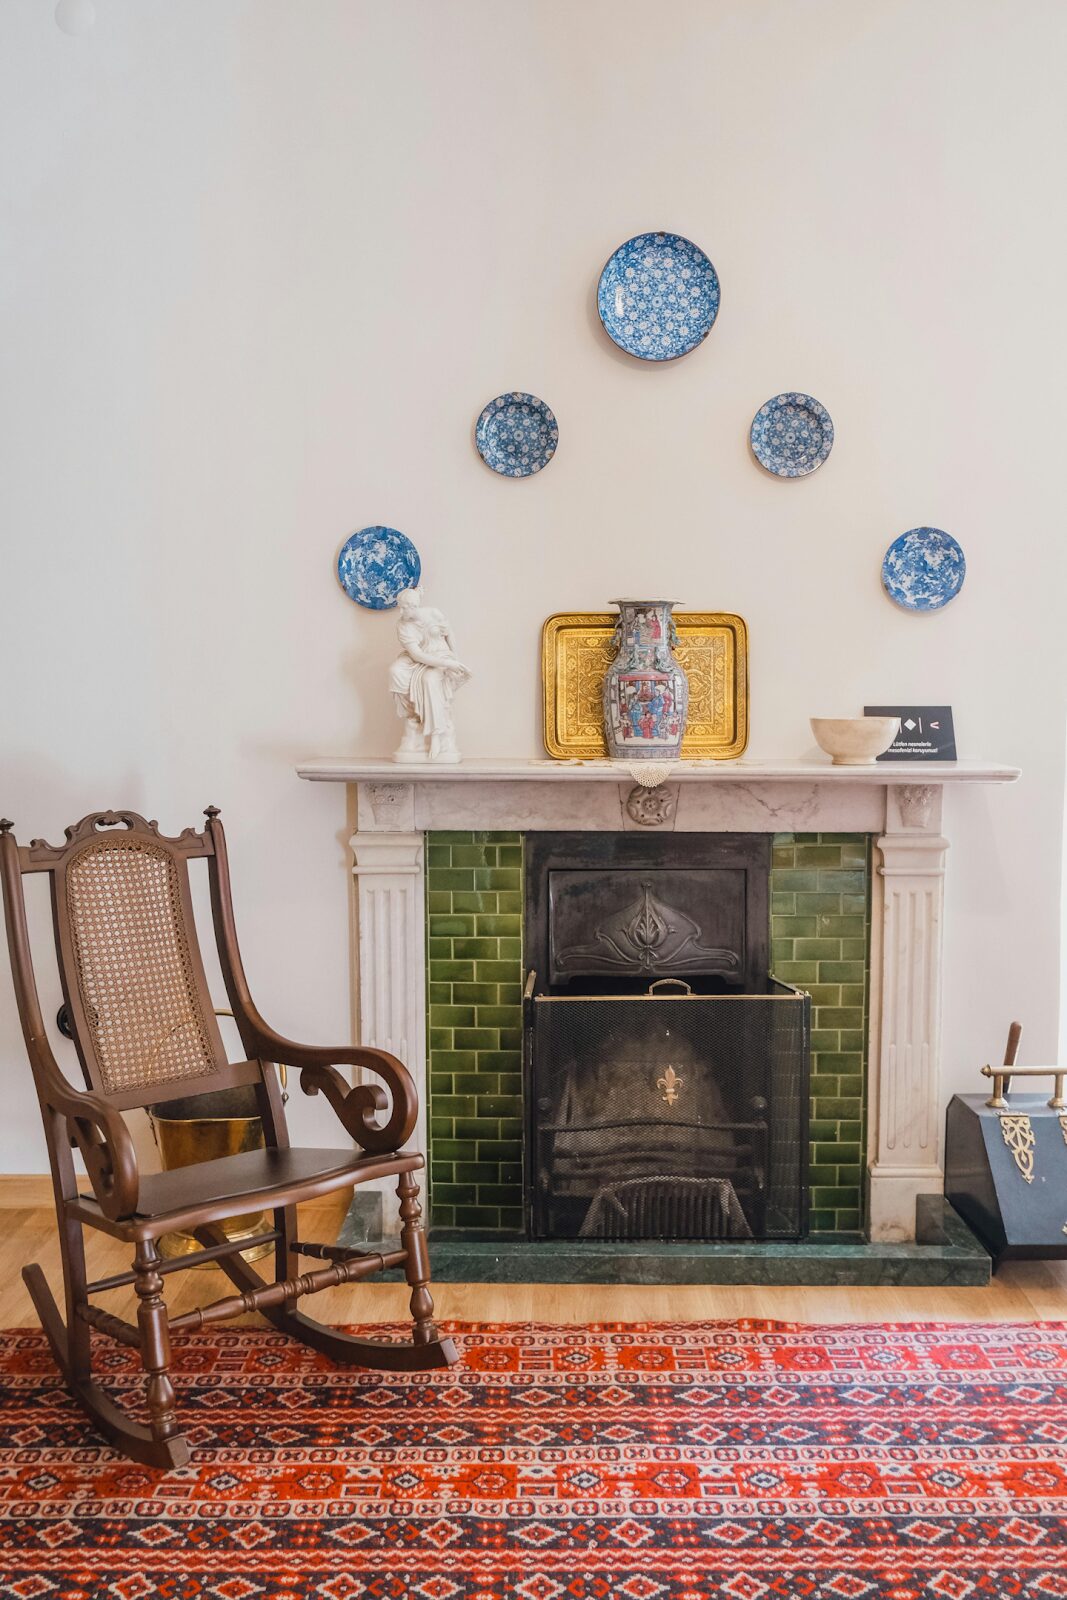 https://www.pexels.com/photo/rocking-chair-near-fireplace-in-cozy-home-17596578/